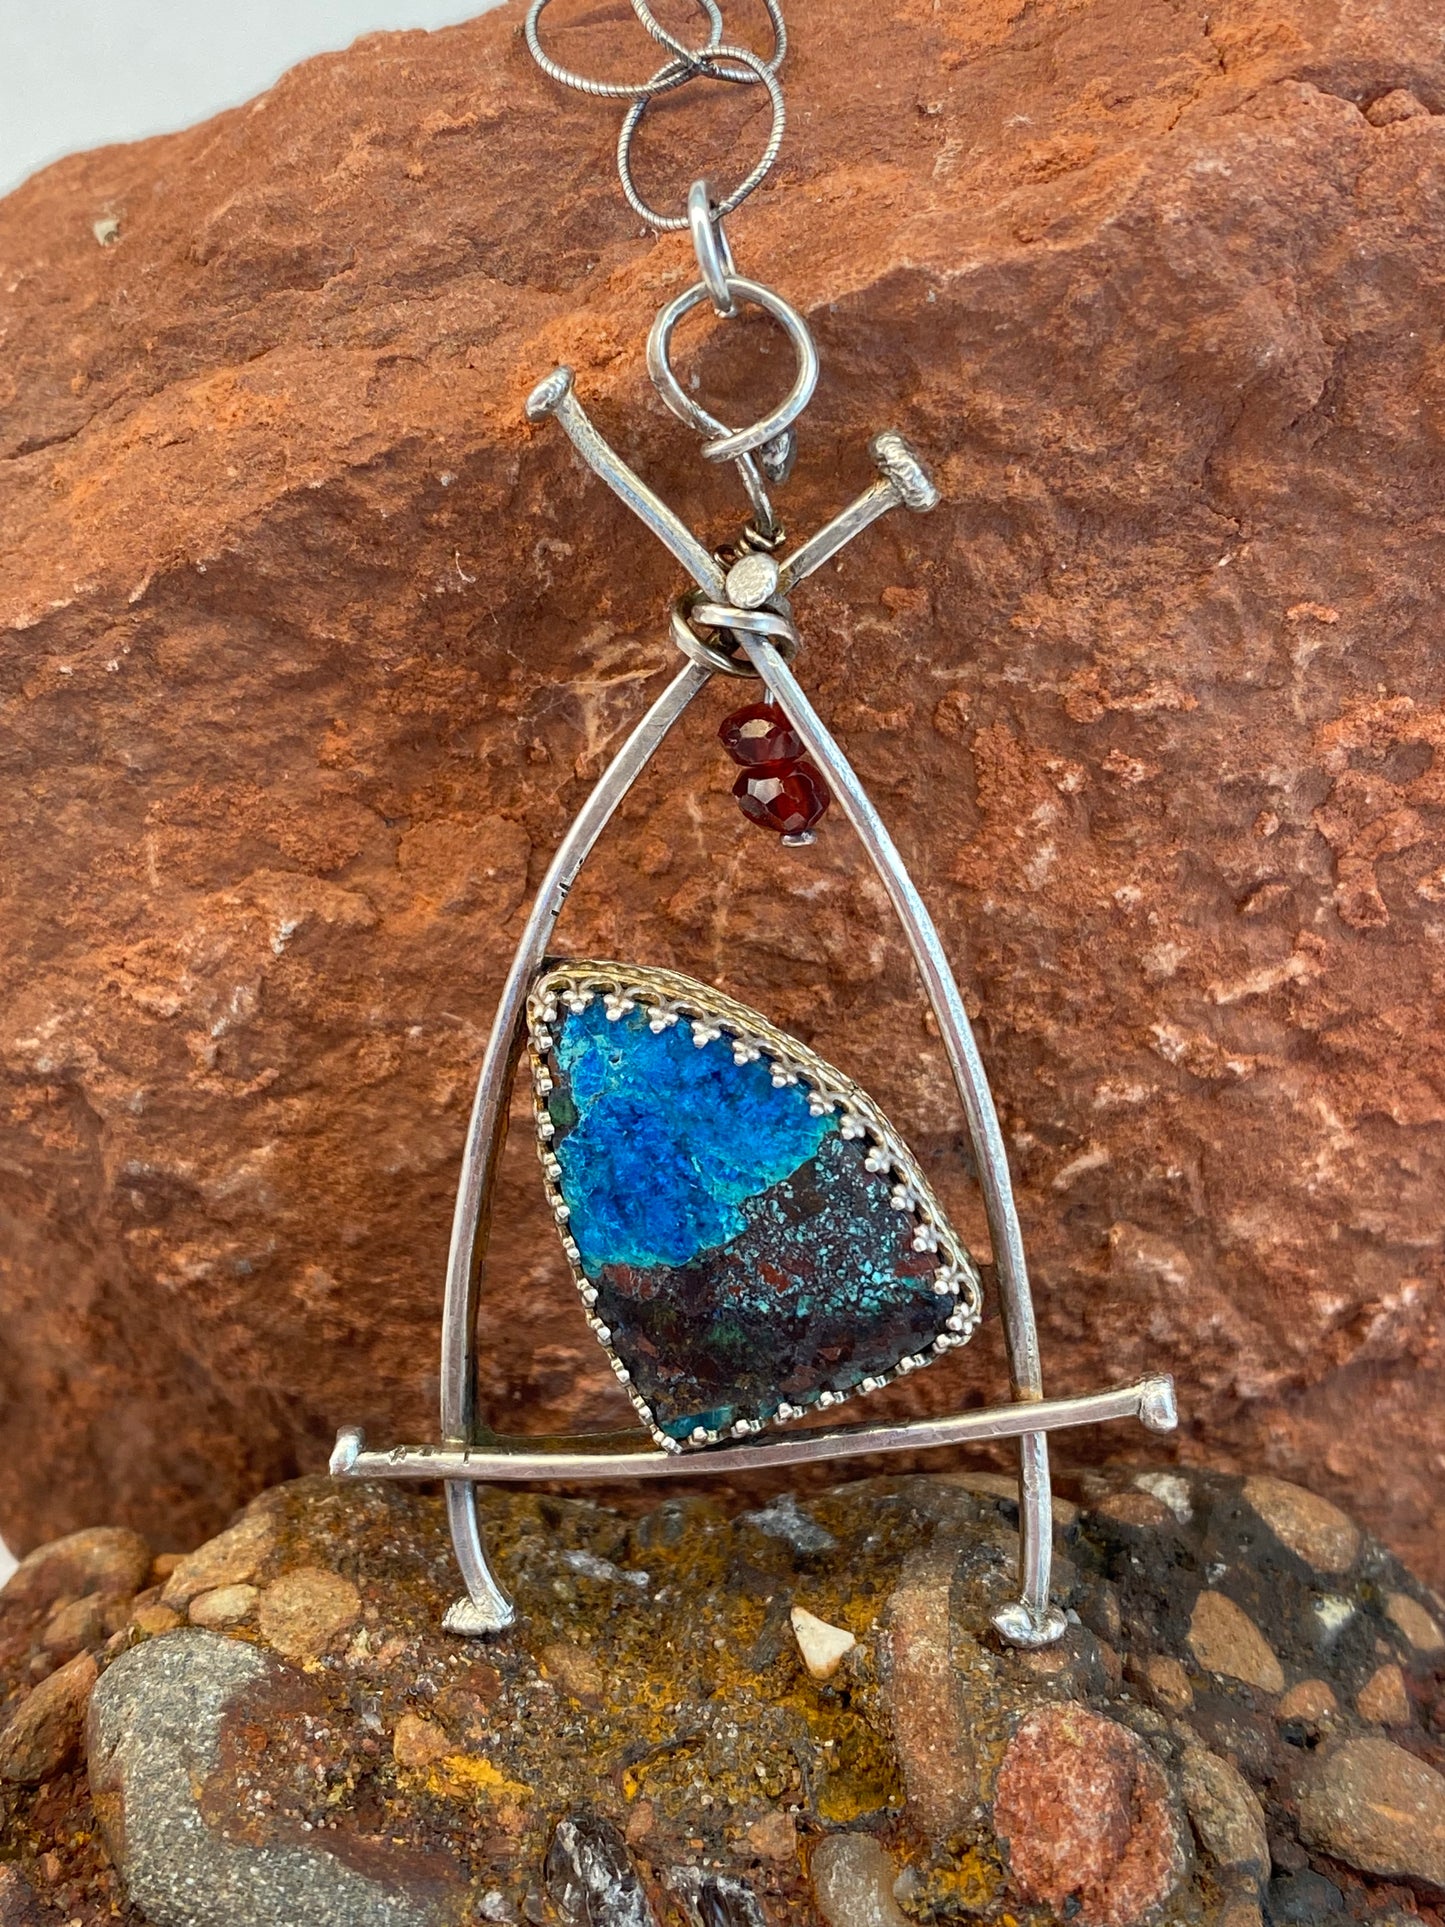 * At the heart of this necklace is beautiful Apache Chrysocolla stone in a fancy bezel surrounded by a sterling silver nail-head frame, reinforced by a sterling backplate. 